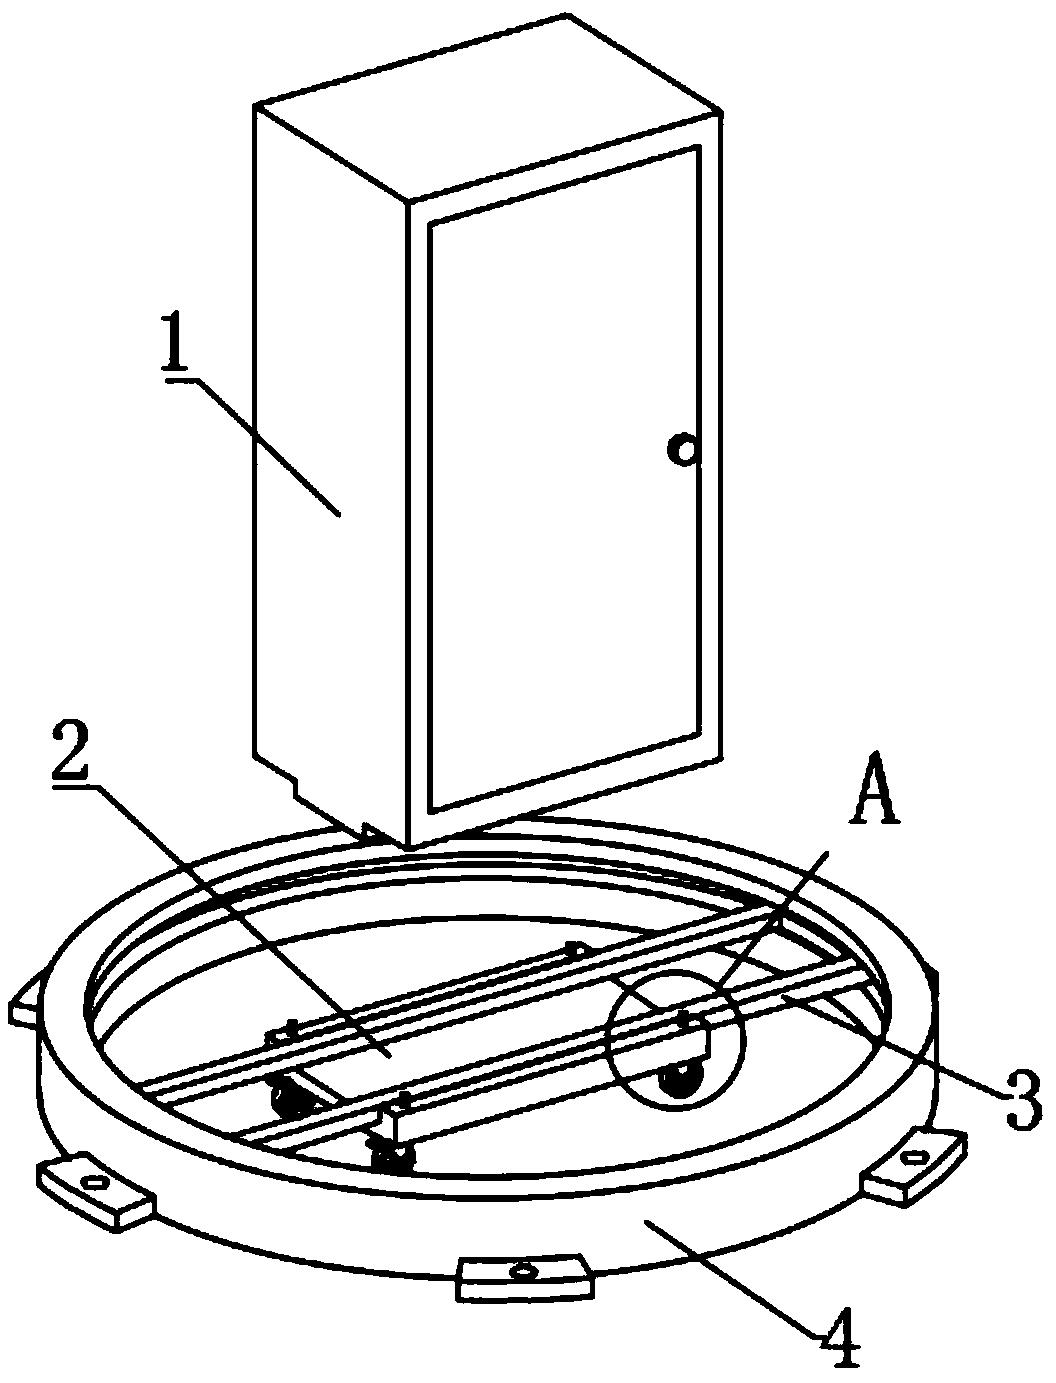 A slidable distribution box based on a bottom slide rail for electrical engineering